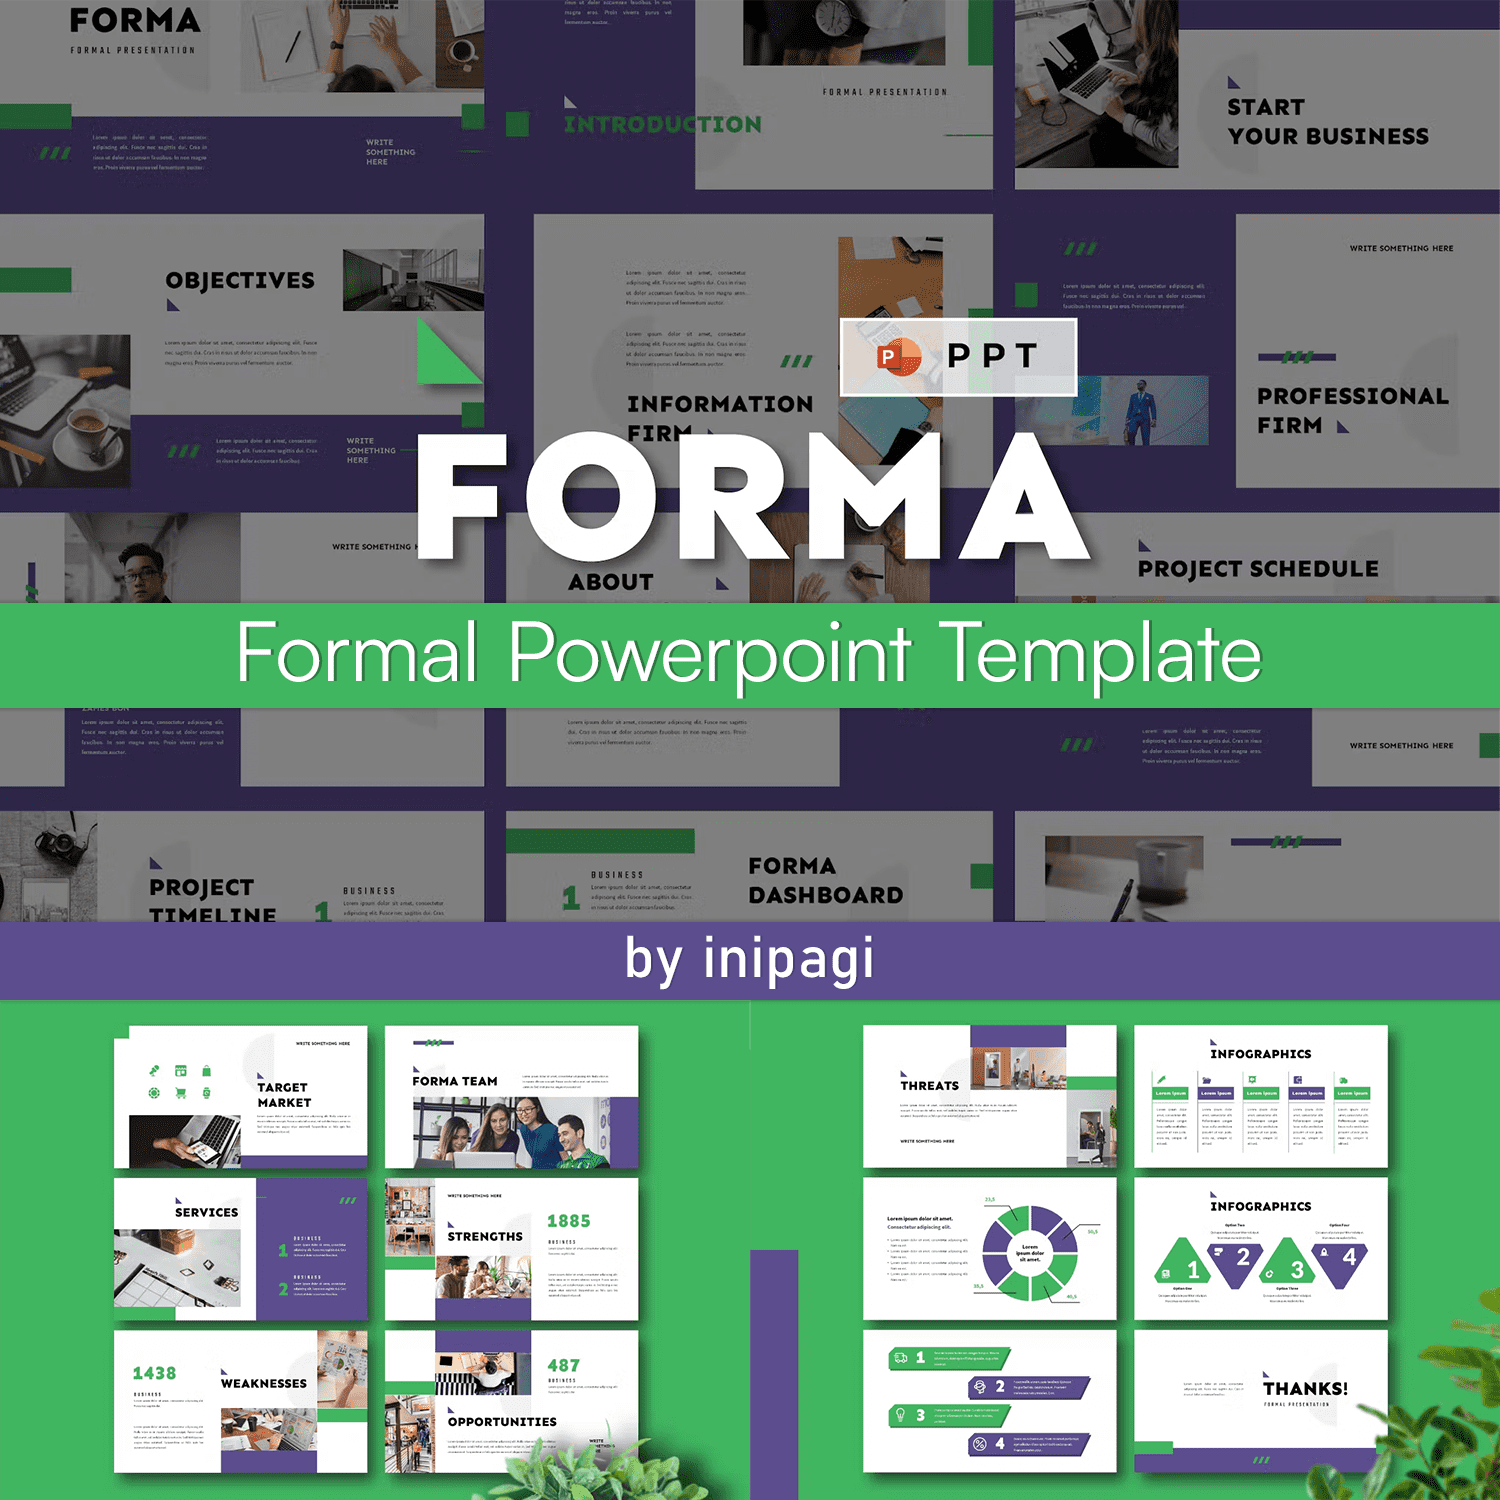 Forma - Formal Powerpoint Template.